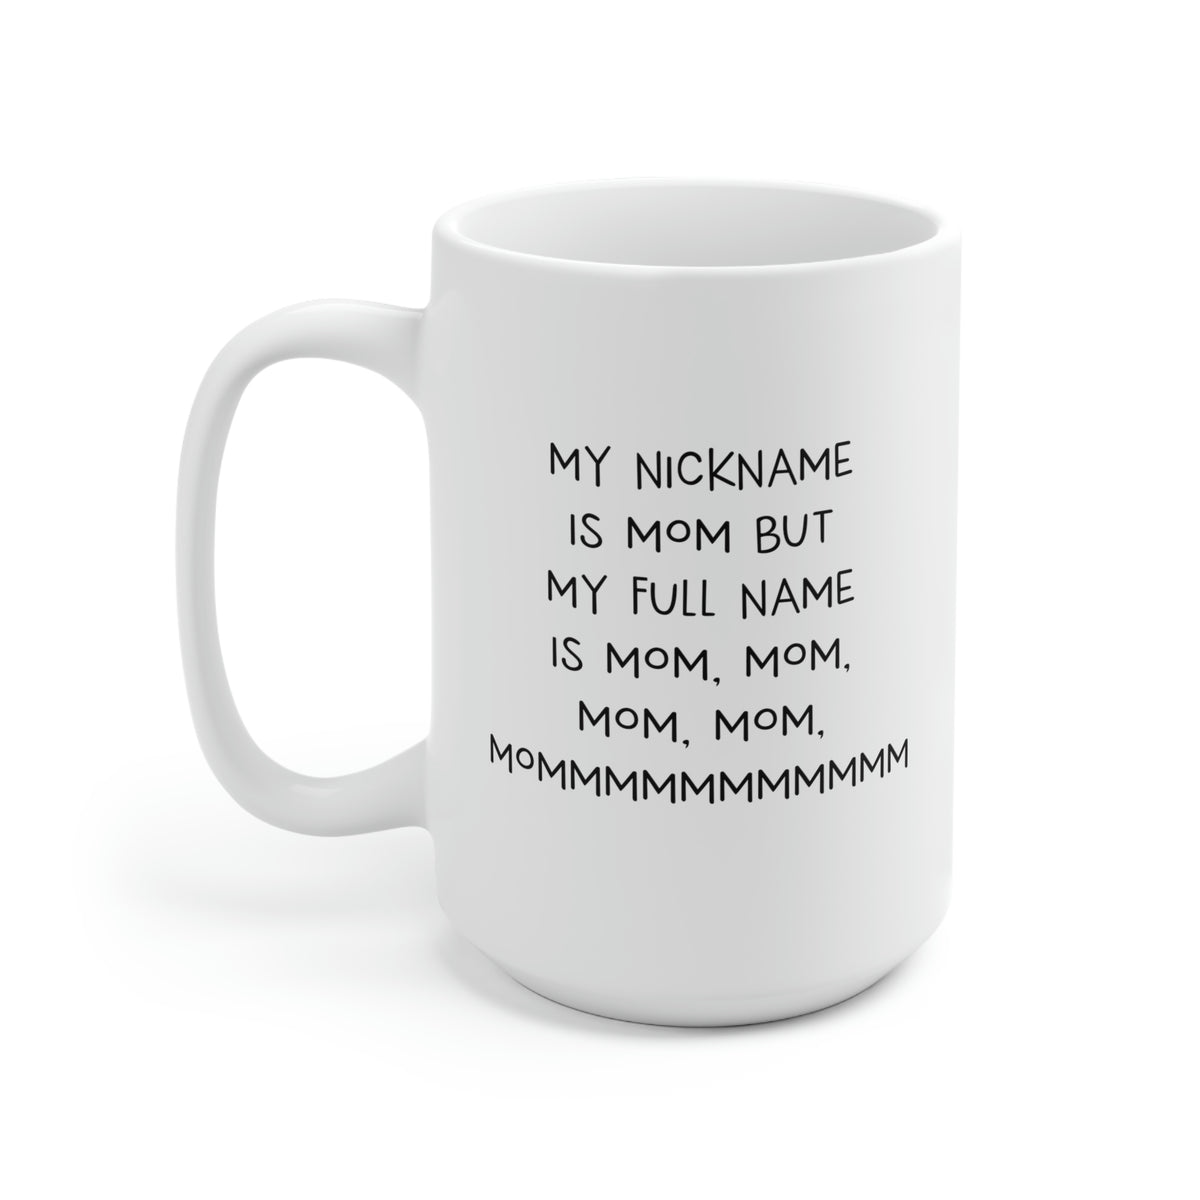 Mom 15oz Coffee Mug, My Nickname Is Mom But My Full Name Is Mom, Mom, Mom, Mom, Mommmmmmmmmmm, Funny Mothers Day For Mommy From Son Daughter